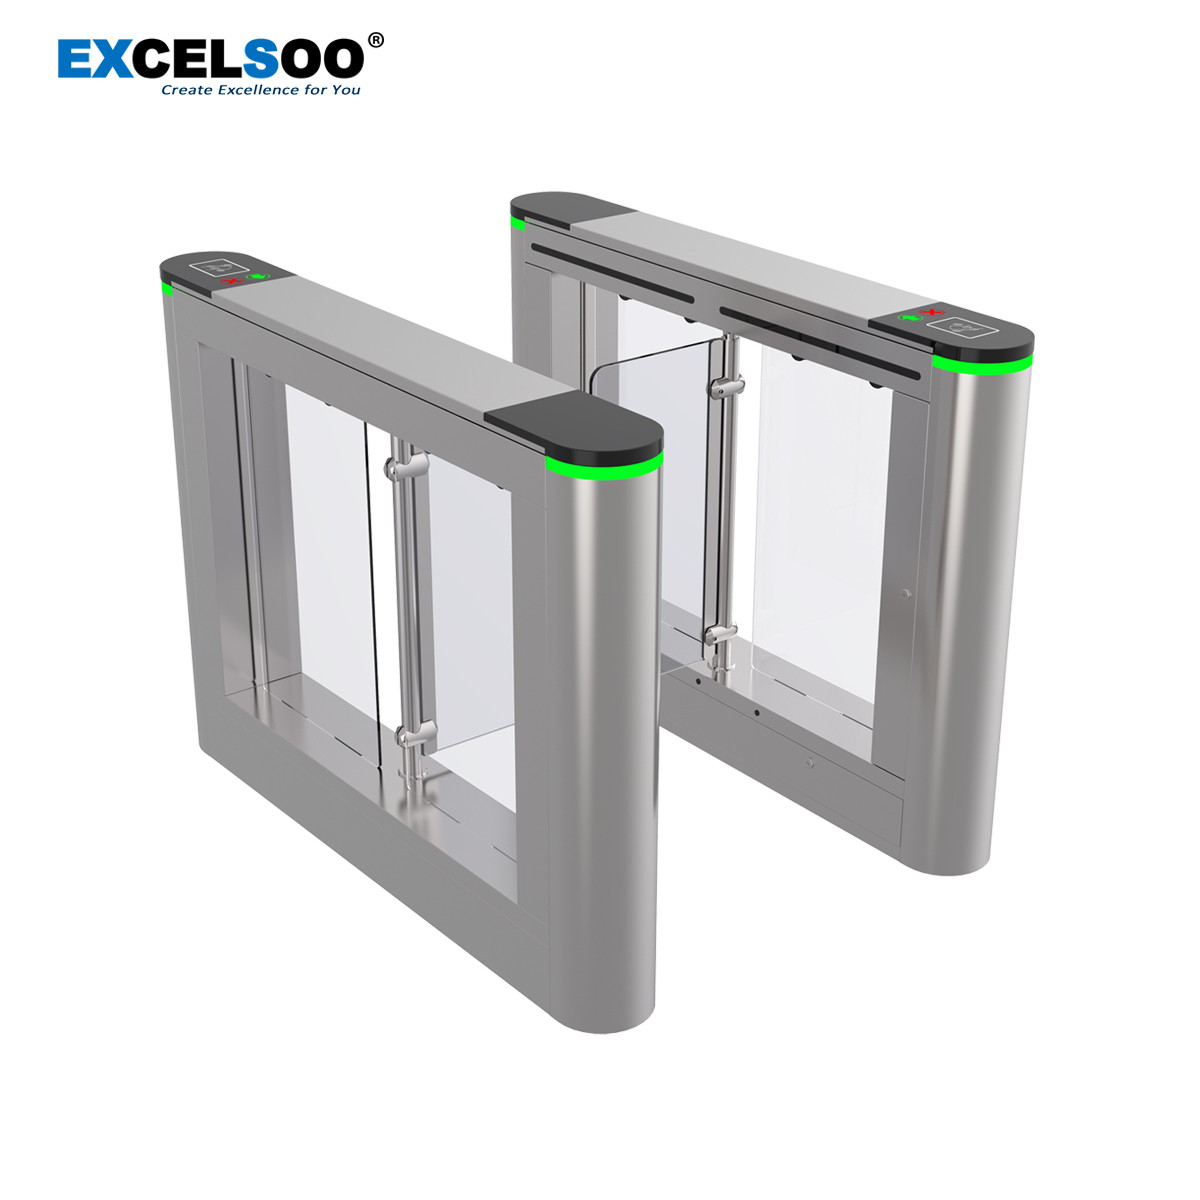 Excelsoo Luxury Swing Barrier SWGB312 for CBD Office Building